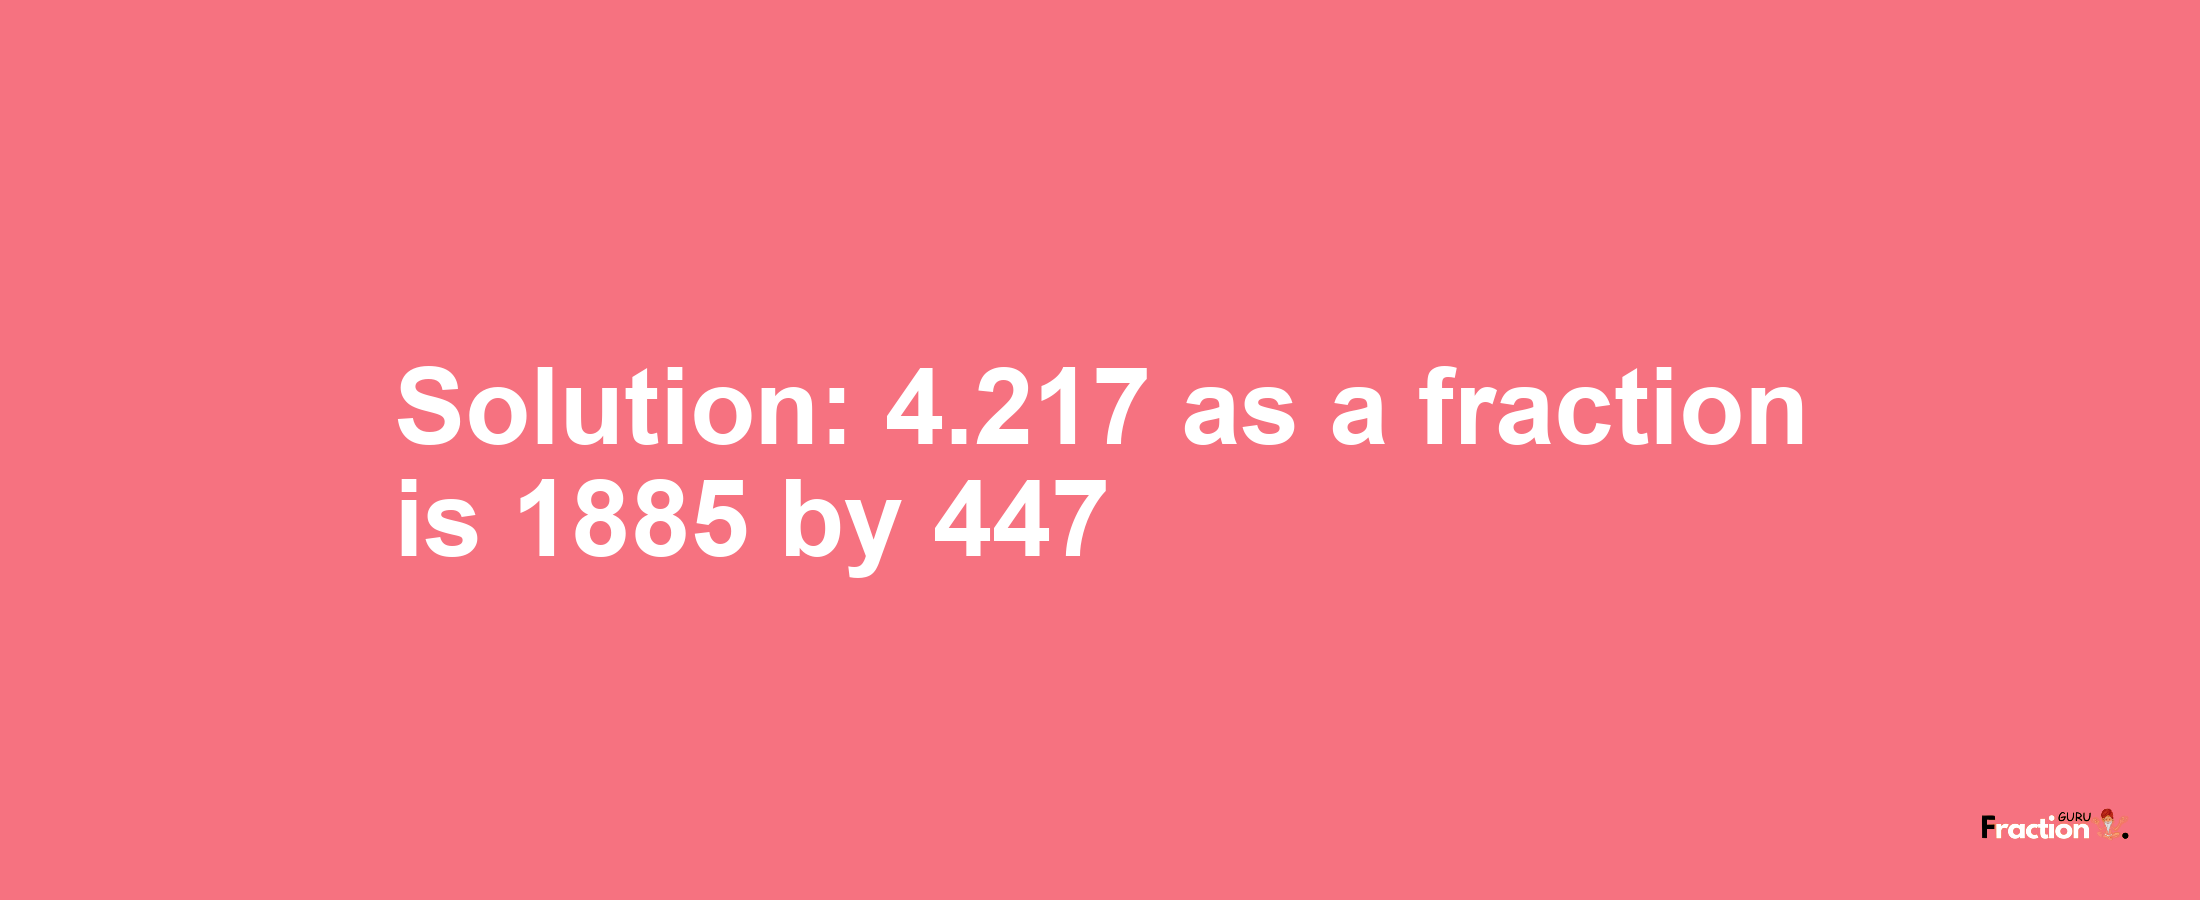 Solution:4.217 as a fraction is 1885/447